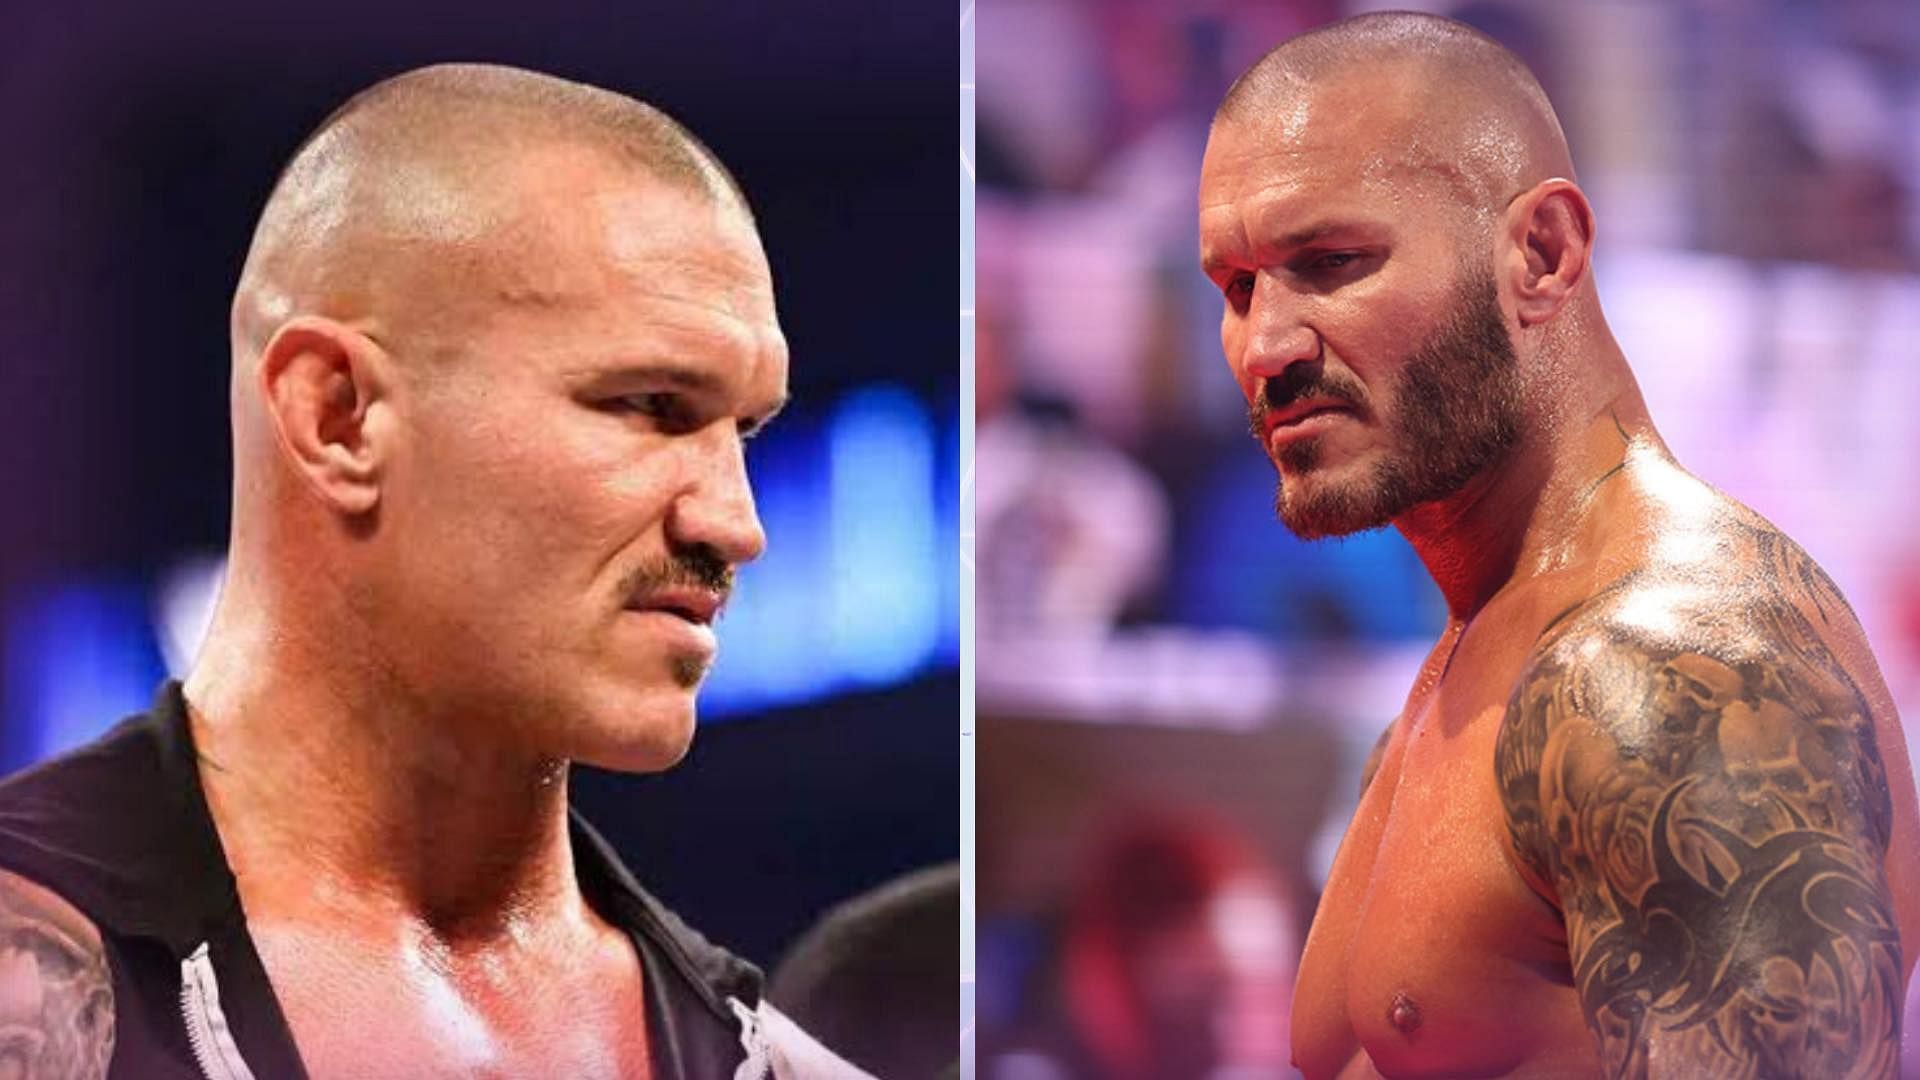 Randy Orton is one of the most dominant stars in WWE